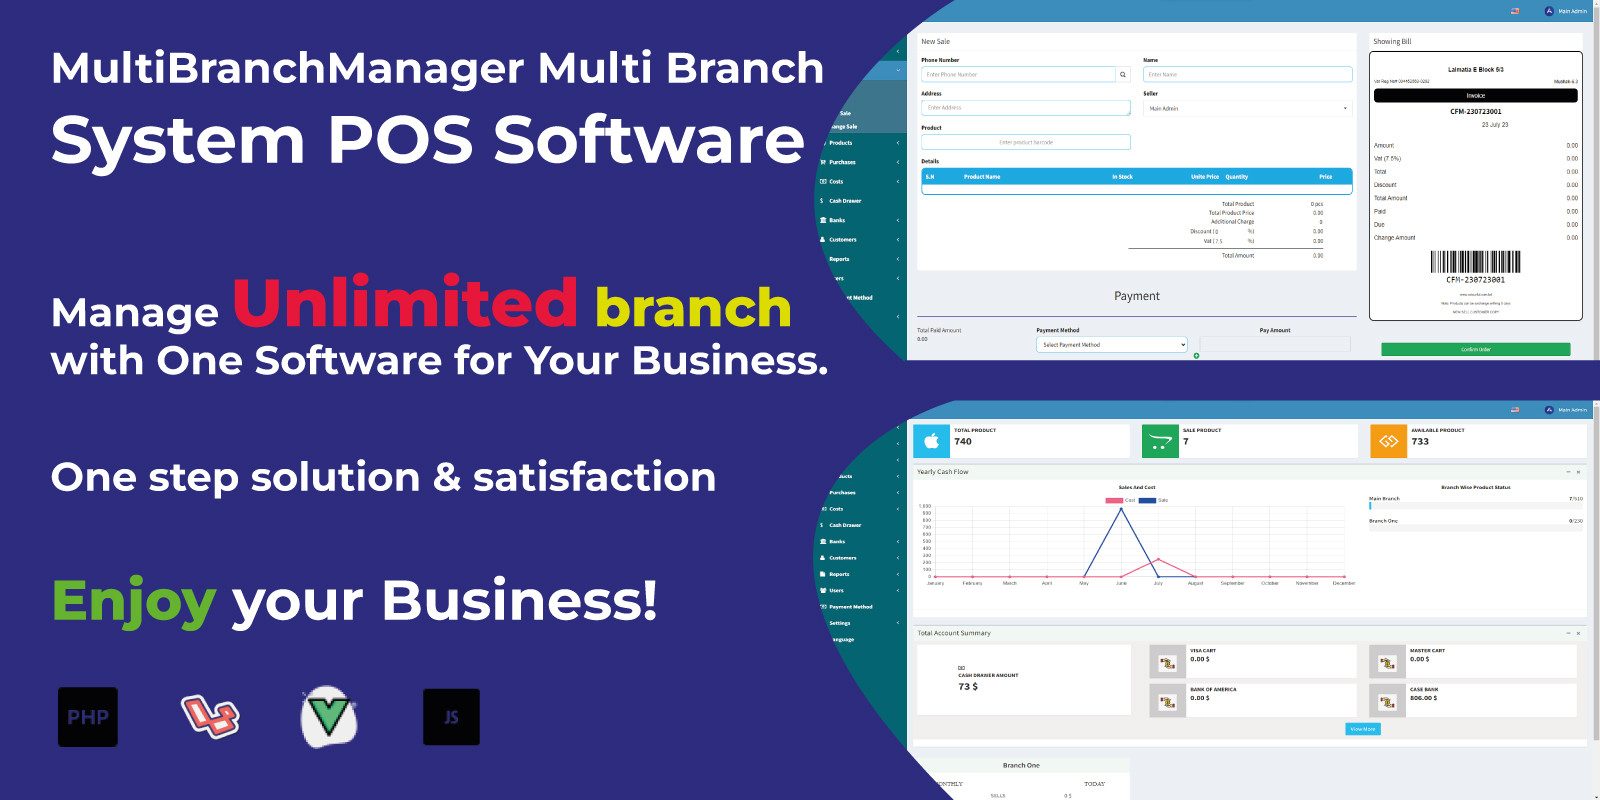 MultiBranch Manager Multi Branch POS Software